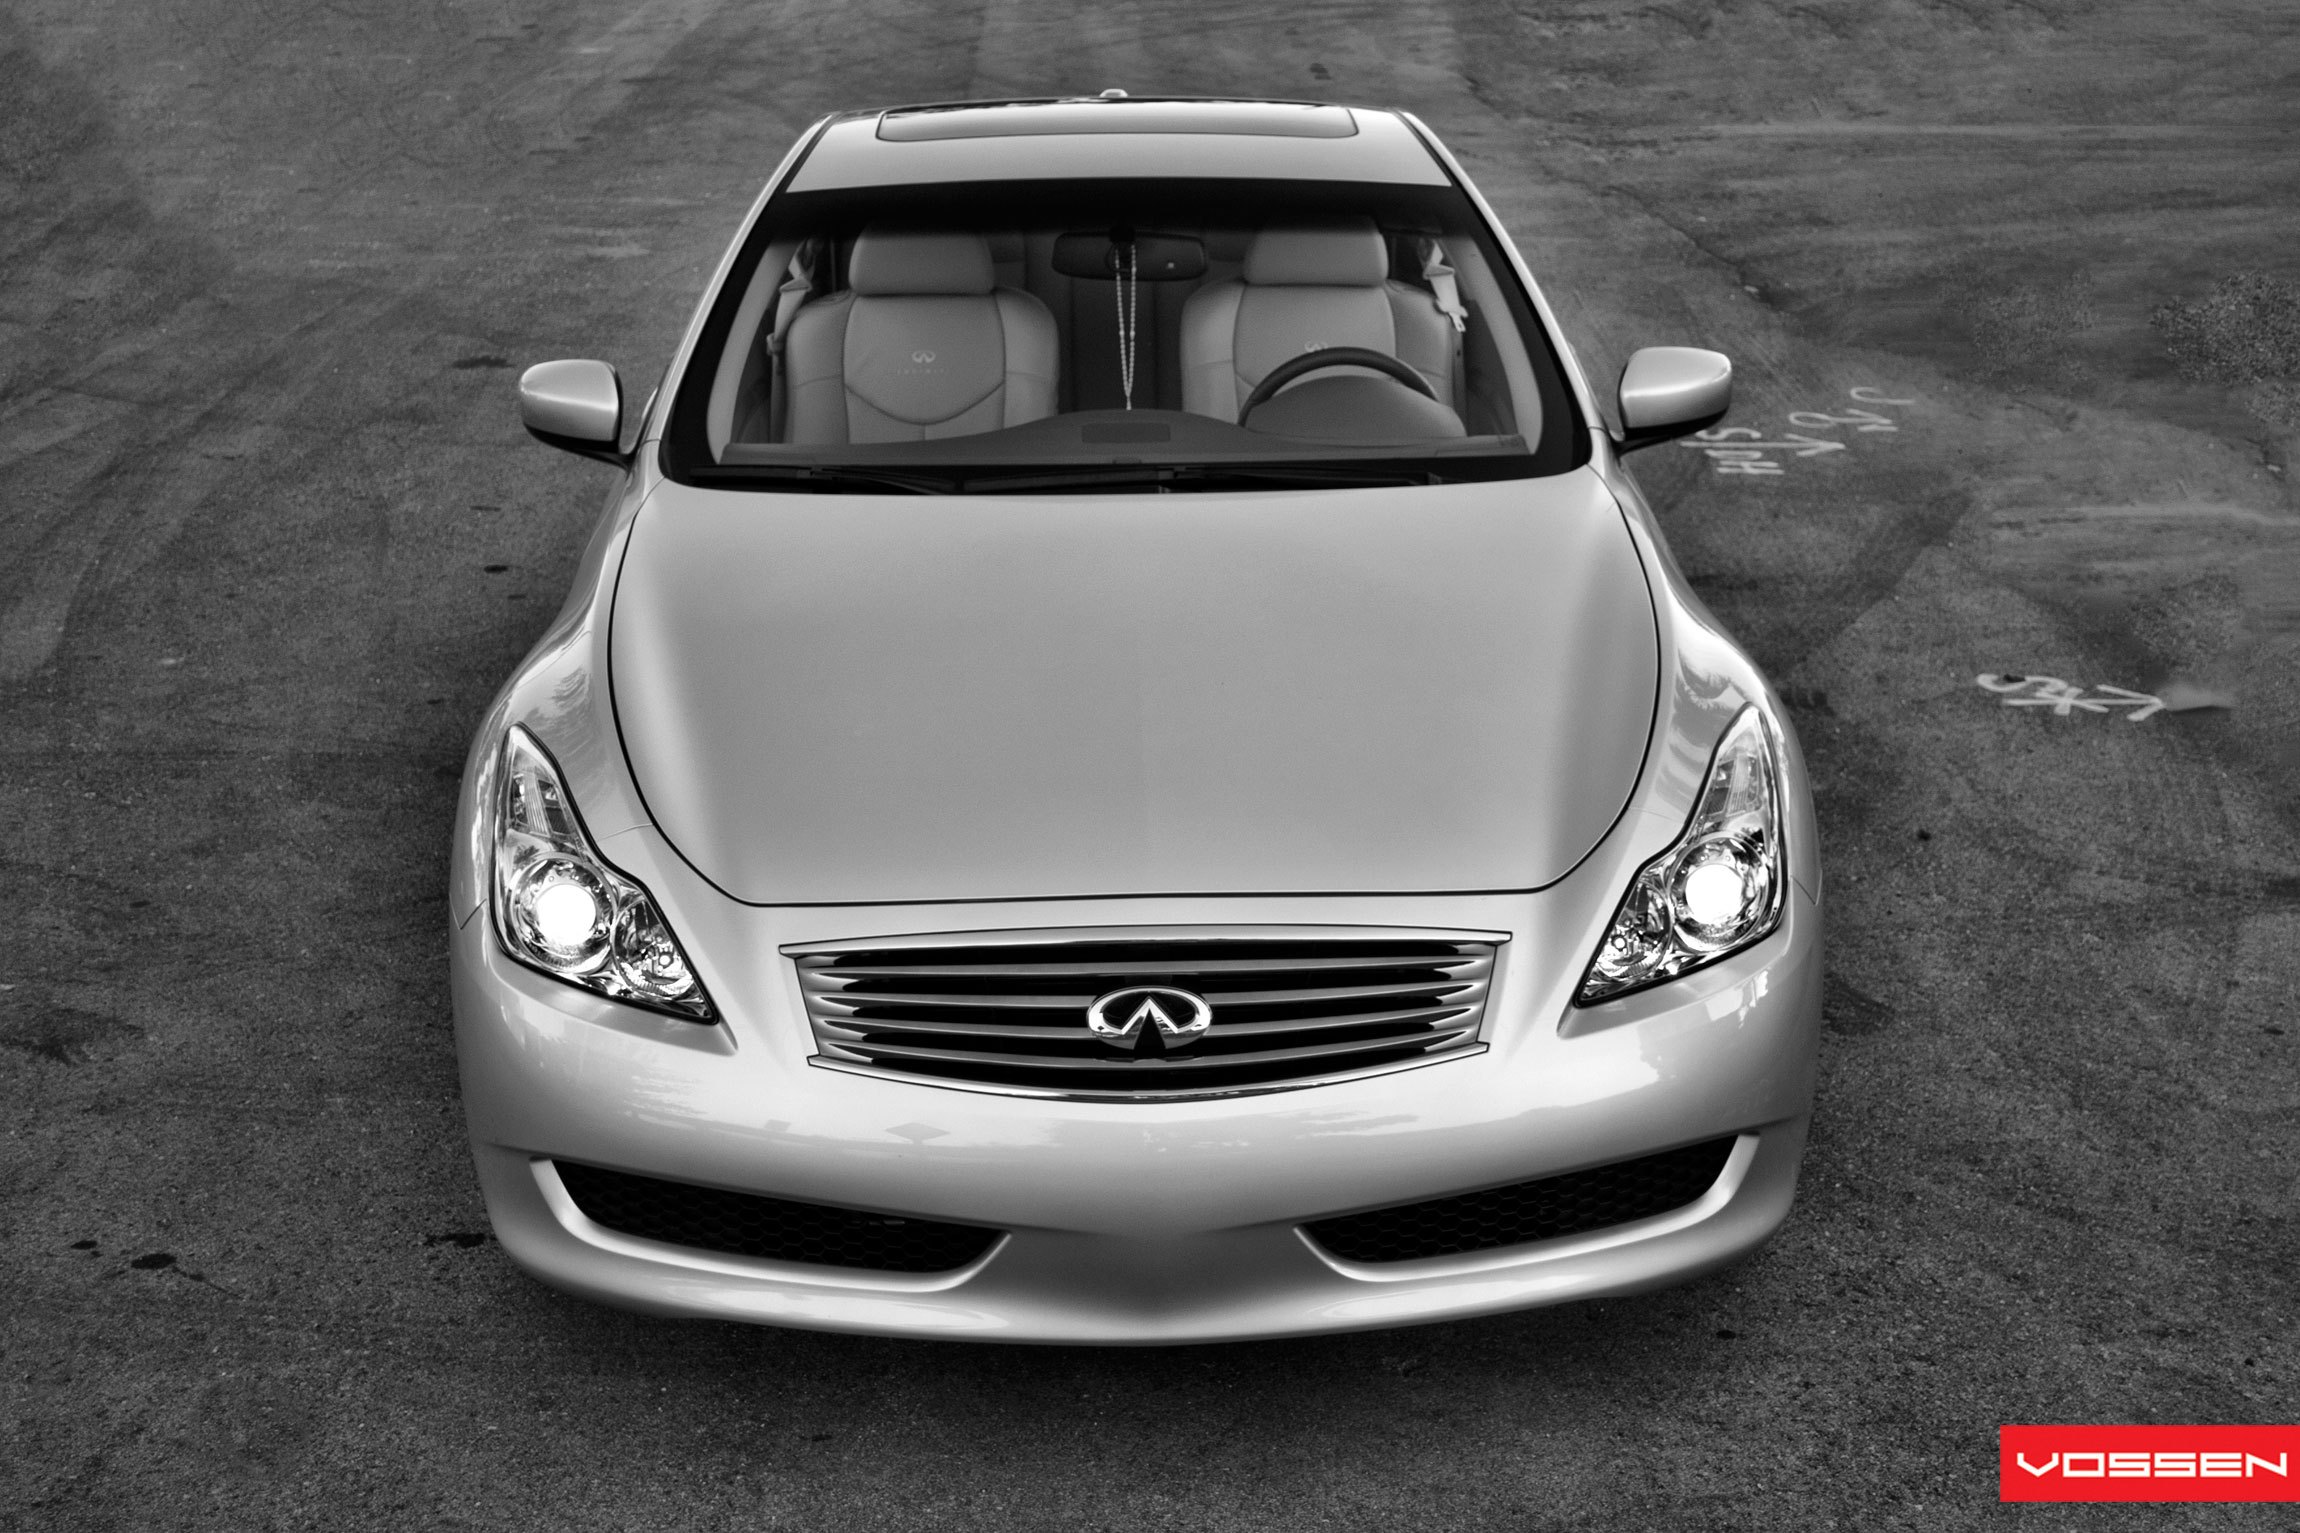 Silver Infiniti G37 with Crystal Clear Headlights - Photo by Vossen